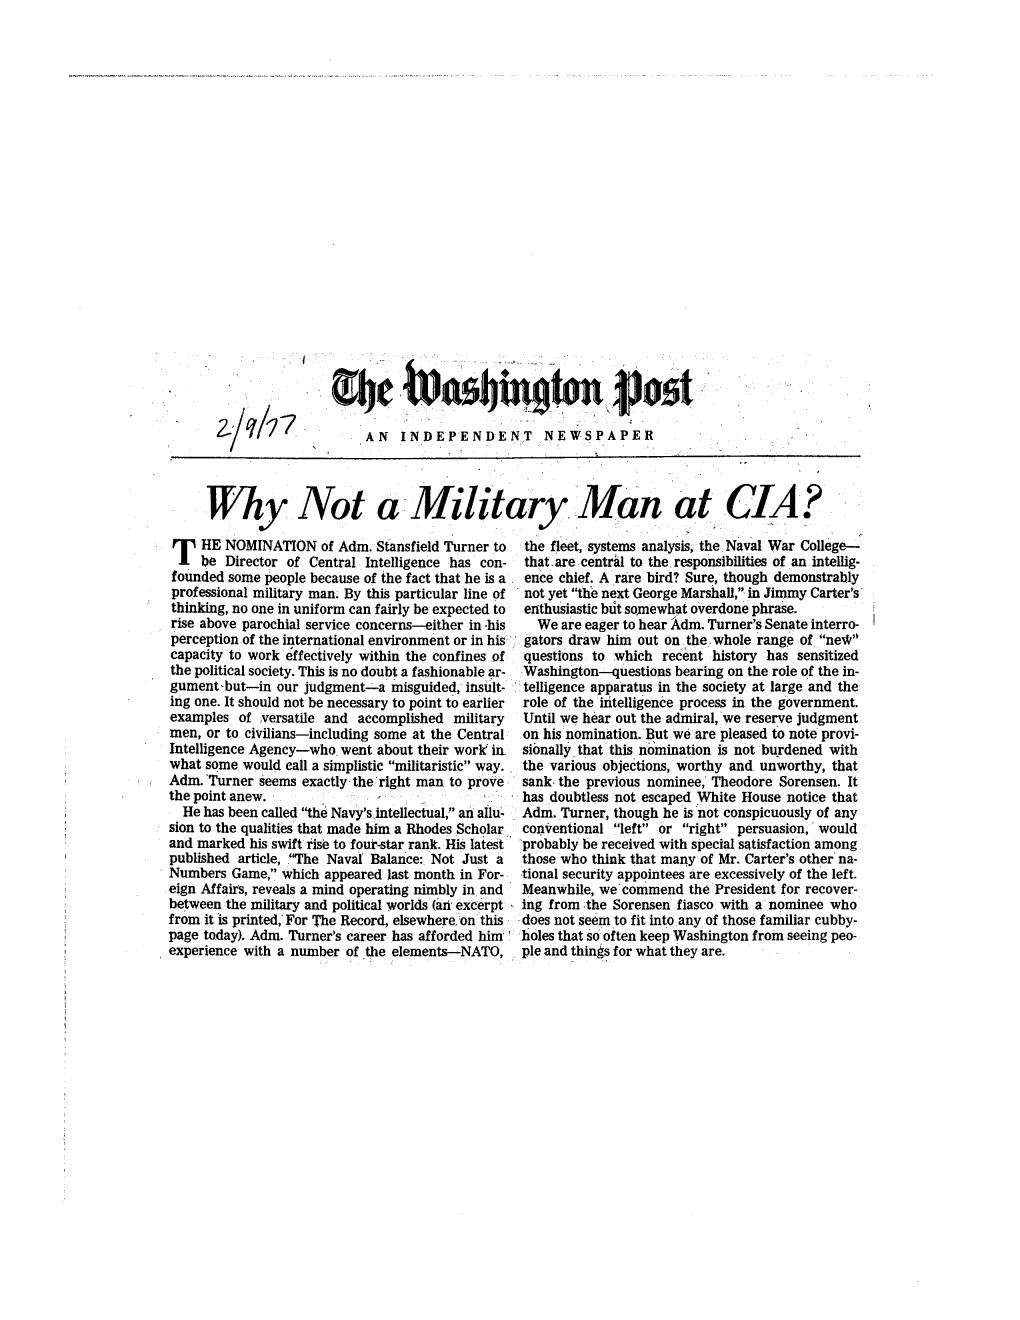 Why Not a Military Man at CIA? HE NOMINATION of Adm